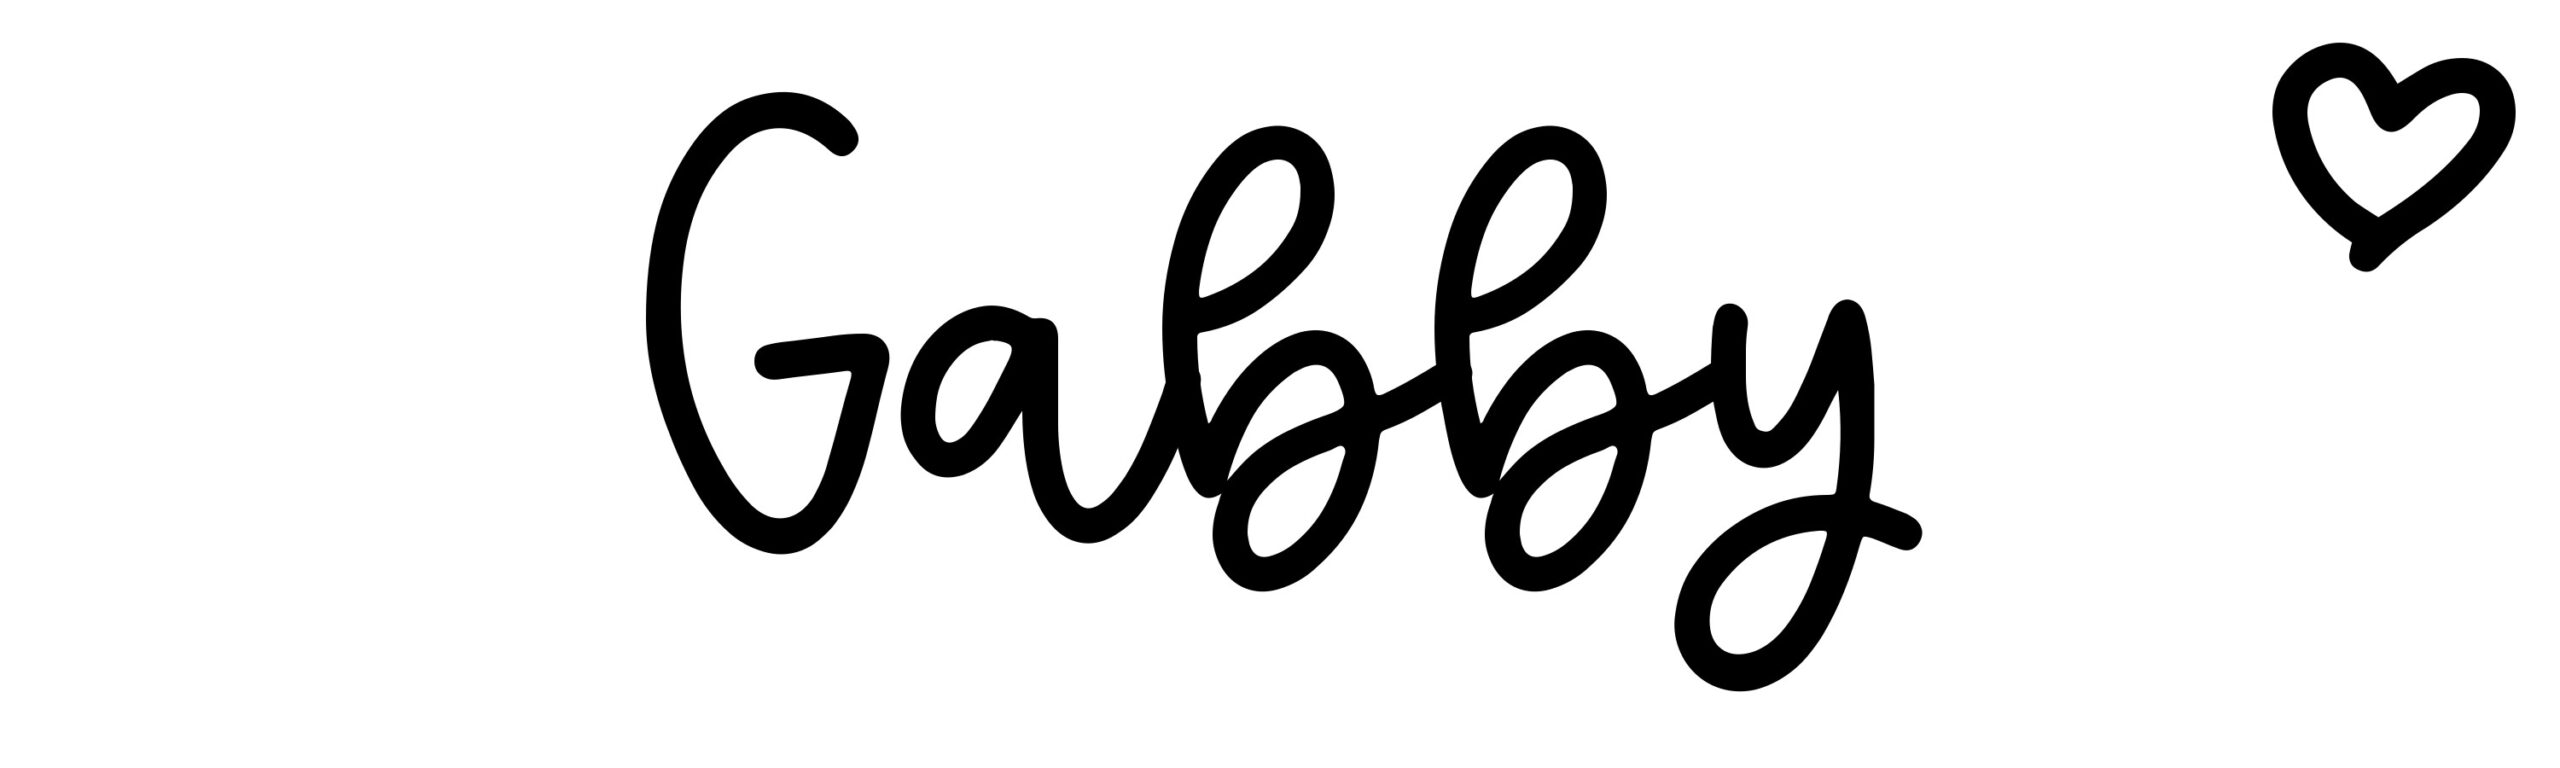 the name gabby in bubble letters